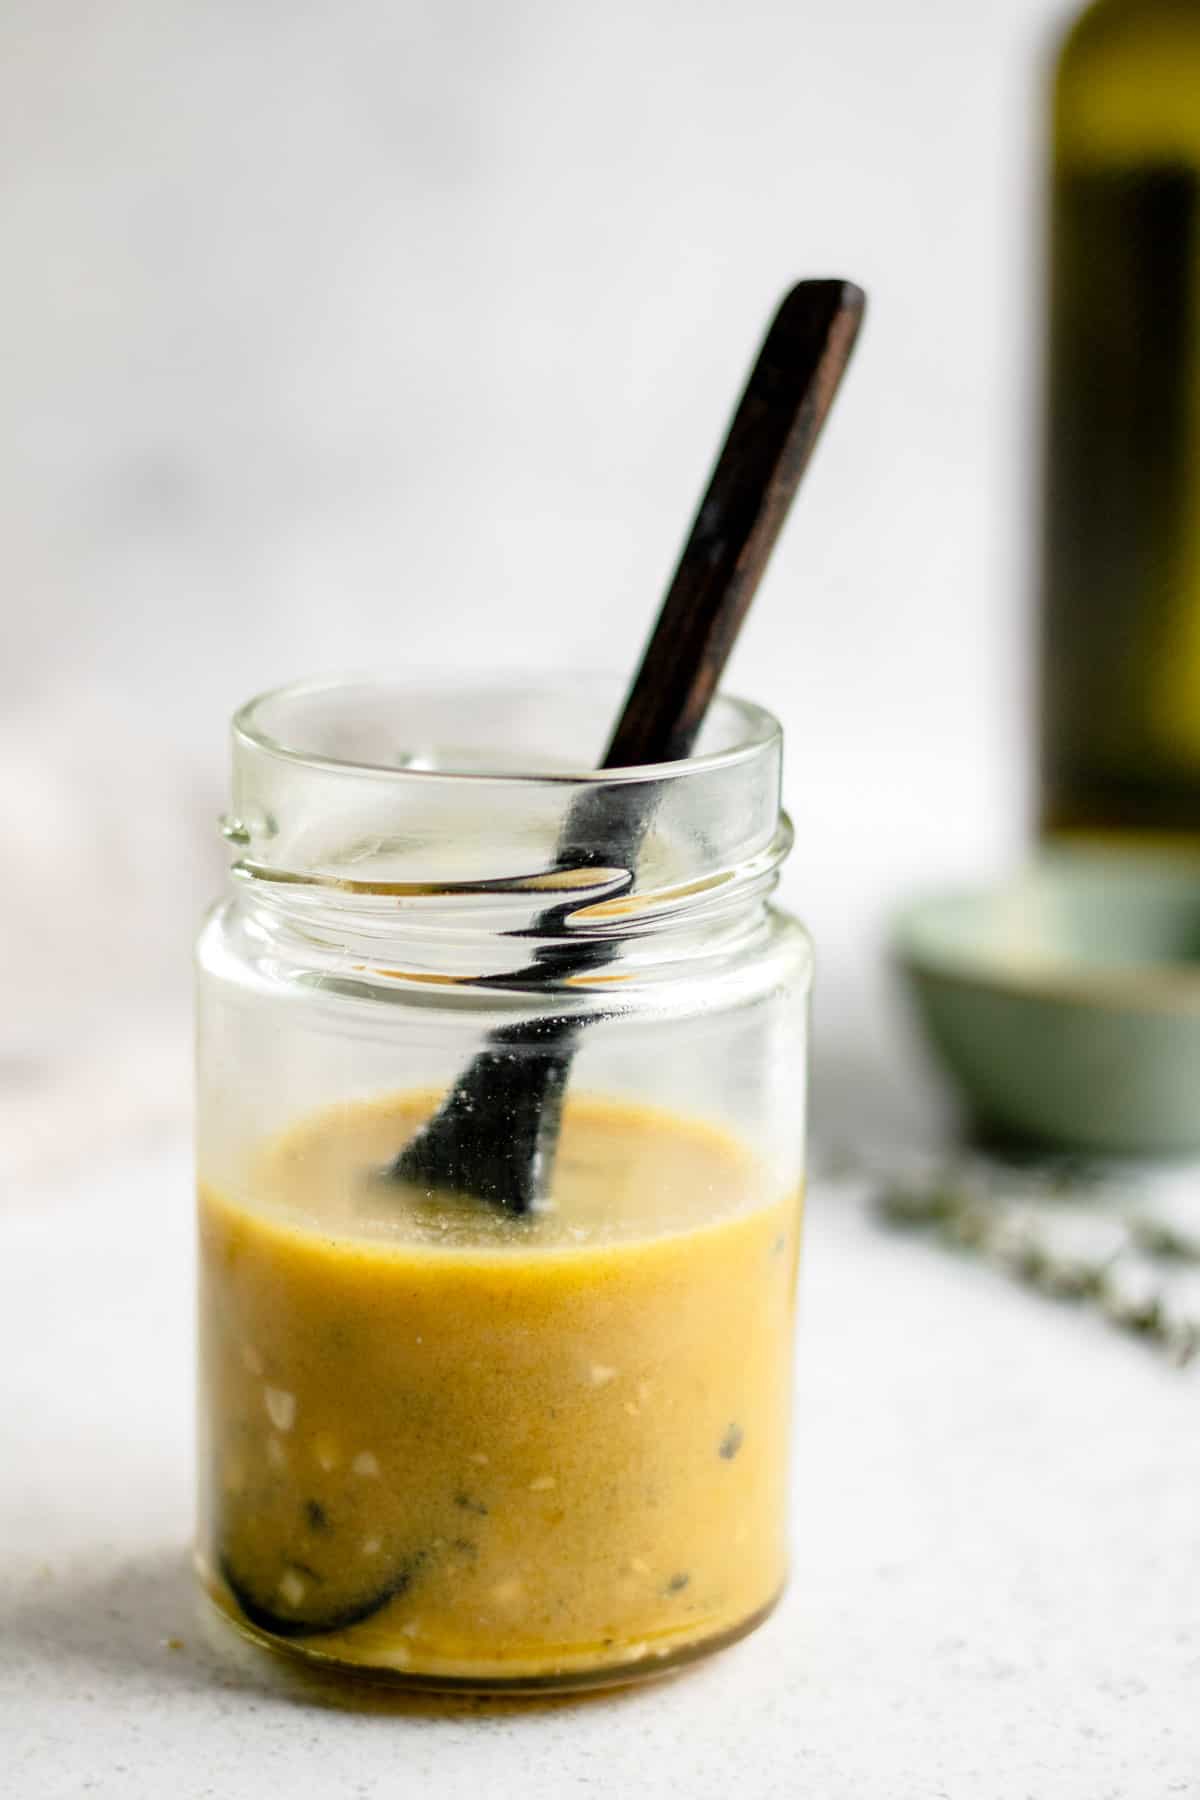 Honey mustard vinaigrette in a glass jar with a wooden spoon and a bottle of extra virgin olive oil in the background.